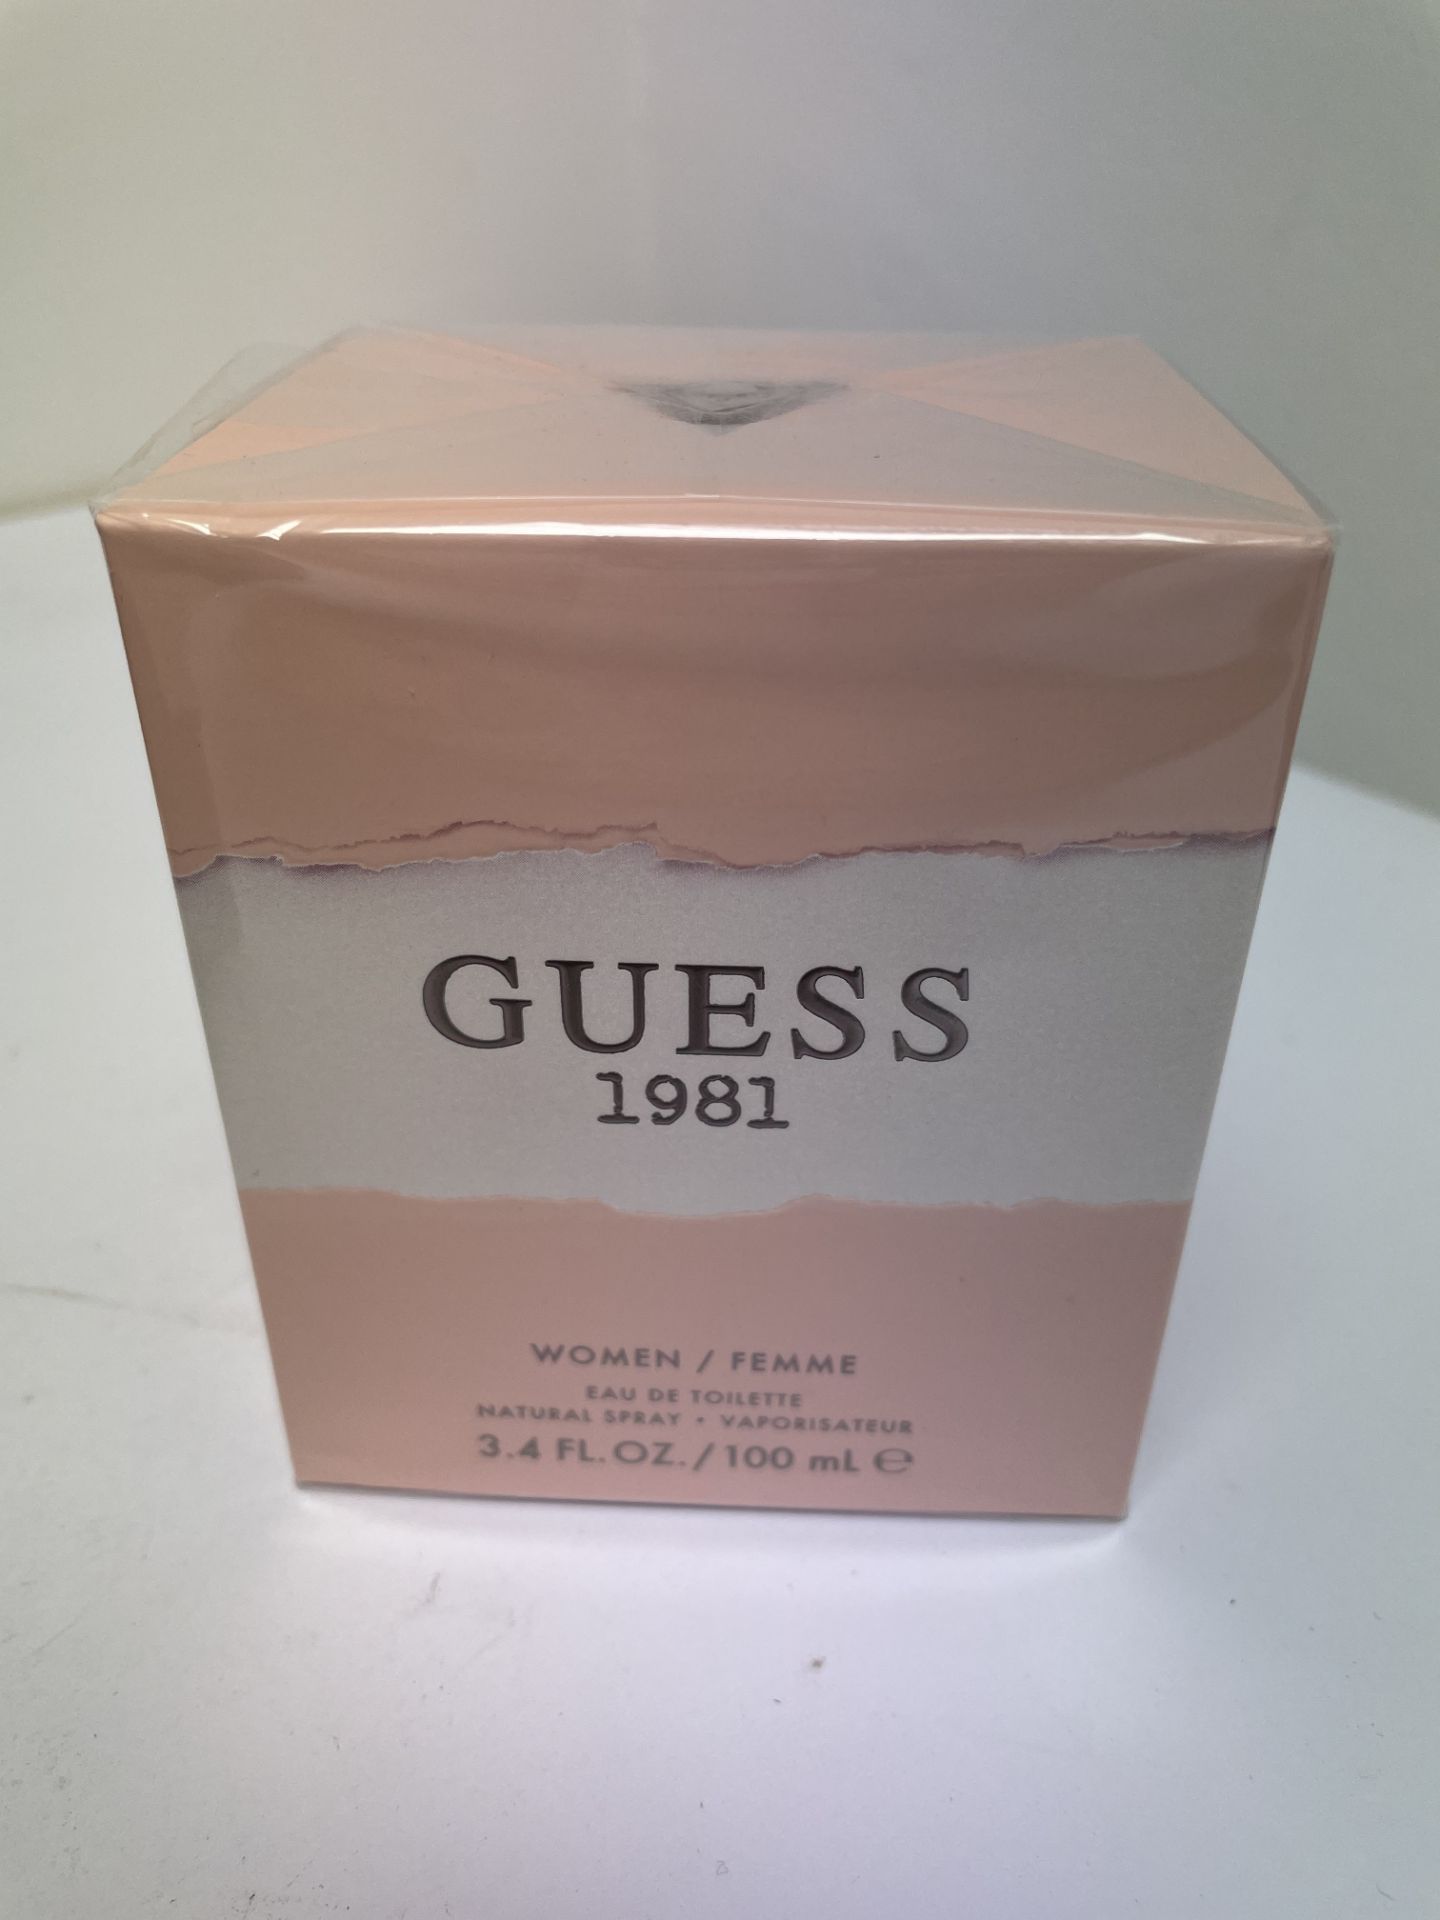 Guess '1981' Fragrances for Him and Her | See description - Image 2 of 3